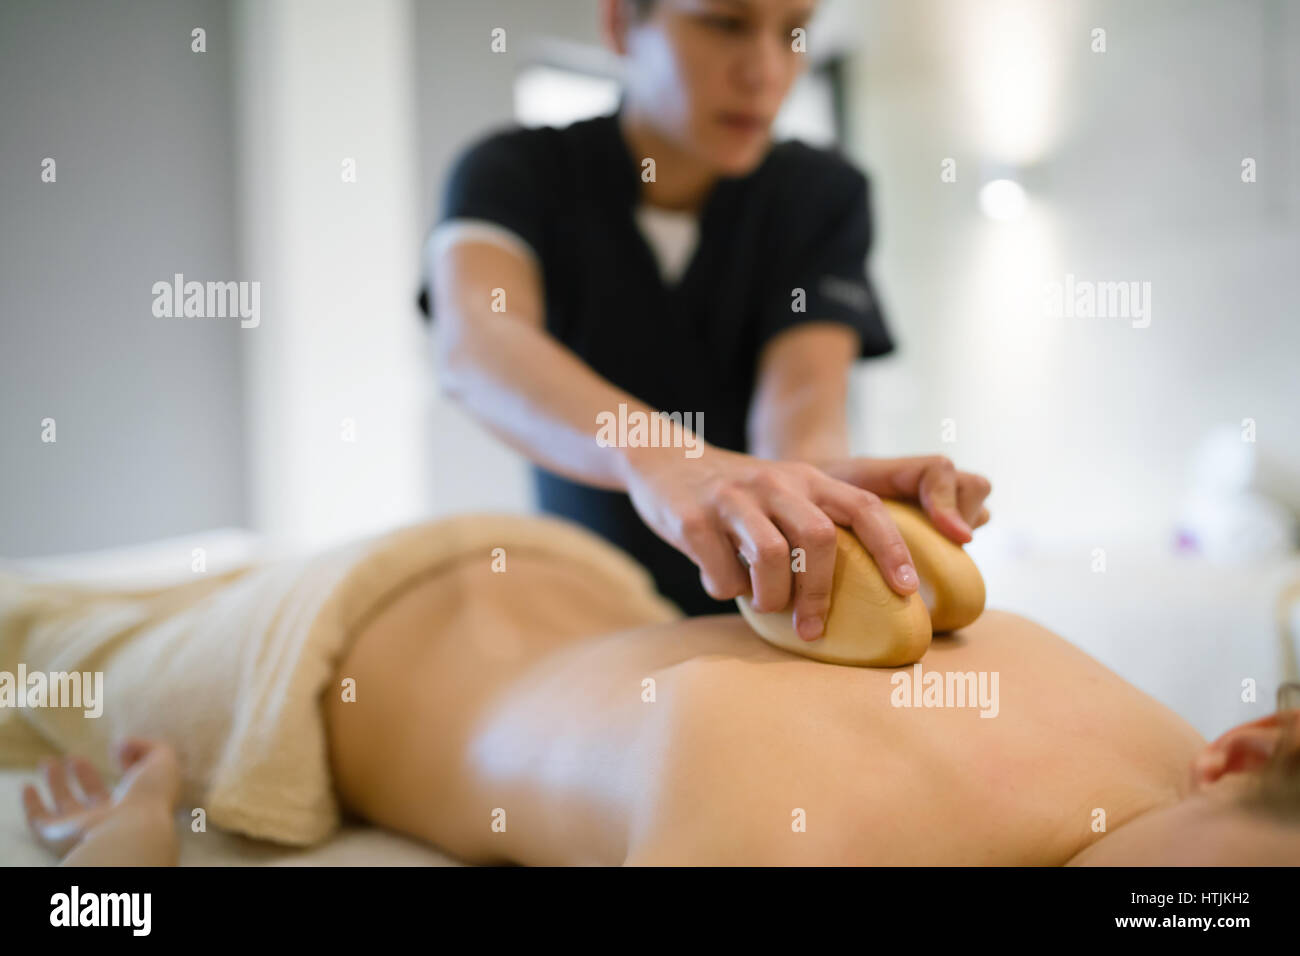 Masseur massaging female on bed while she relaxes Stock Photo